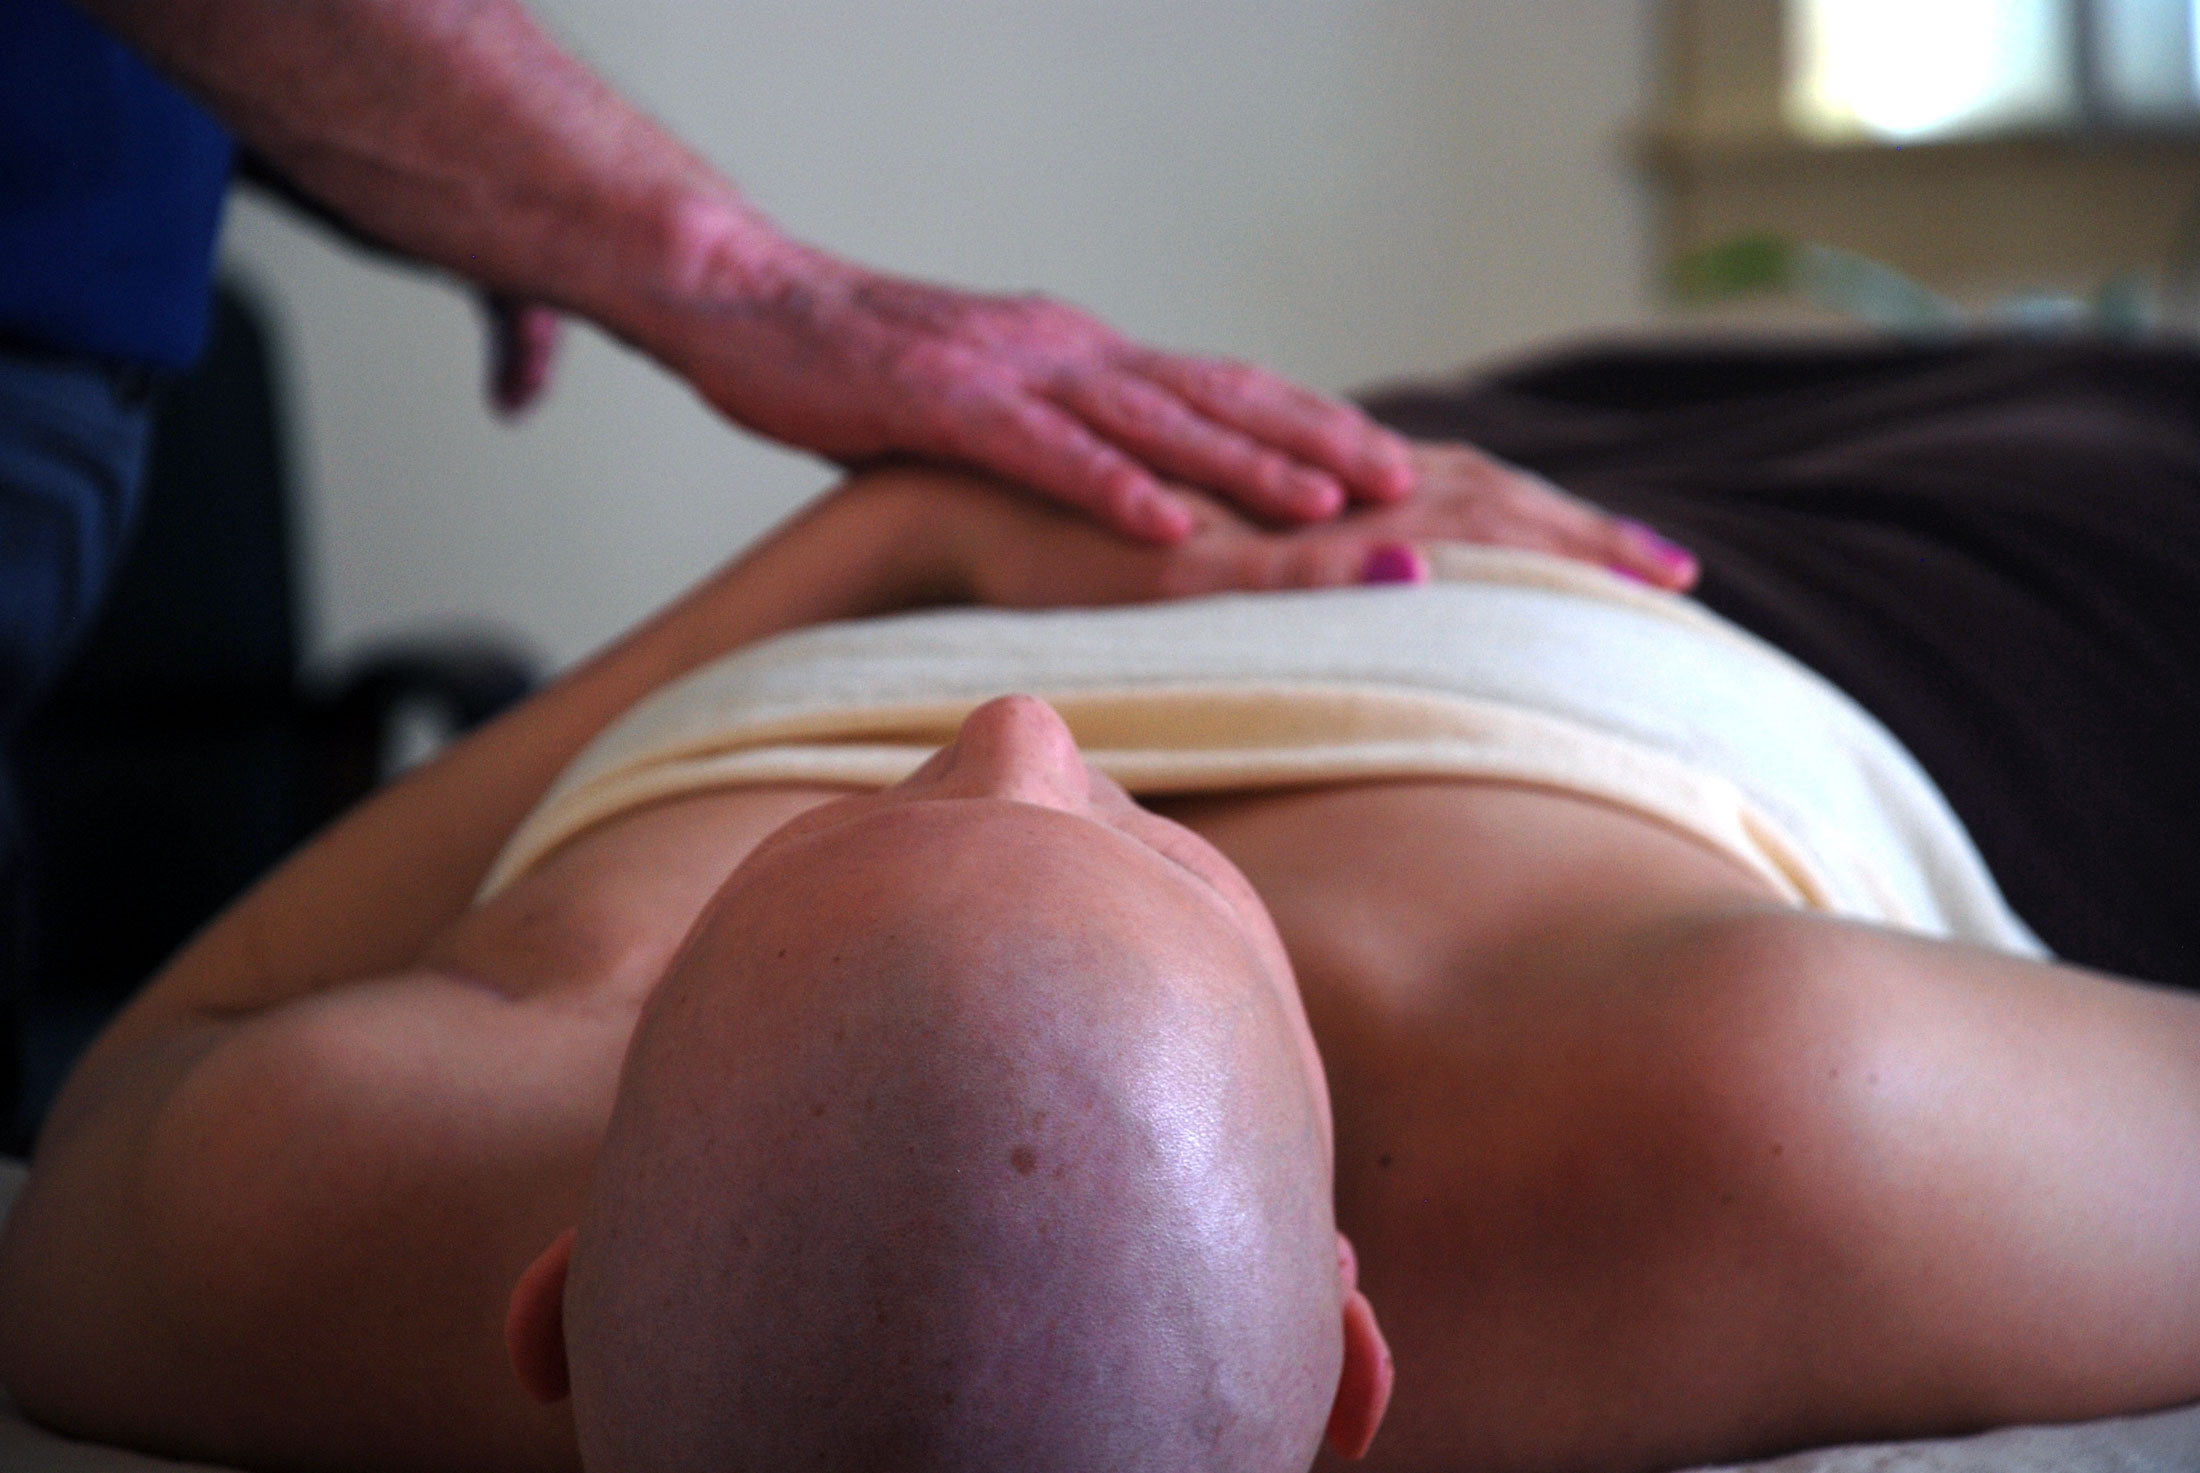 The Association of Massage Therapists in Healthcare